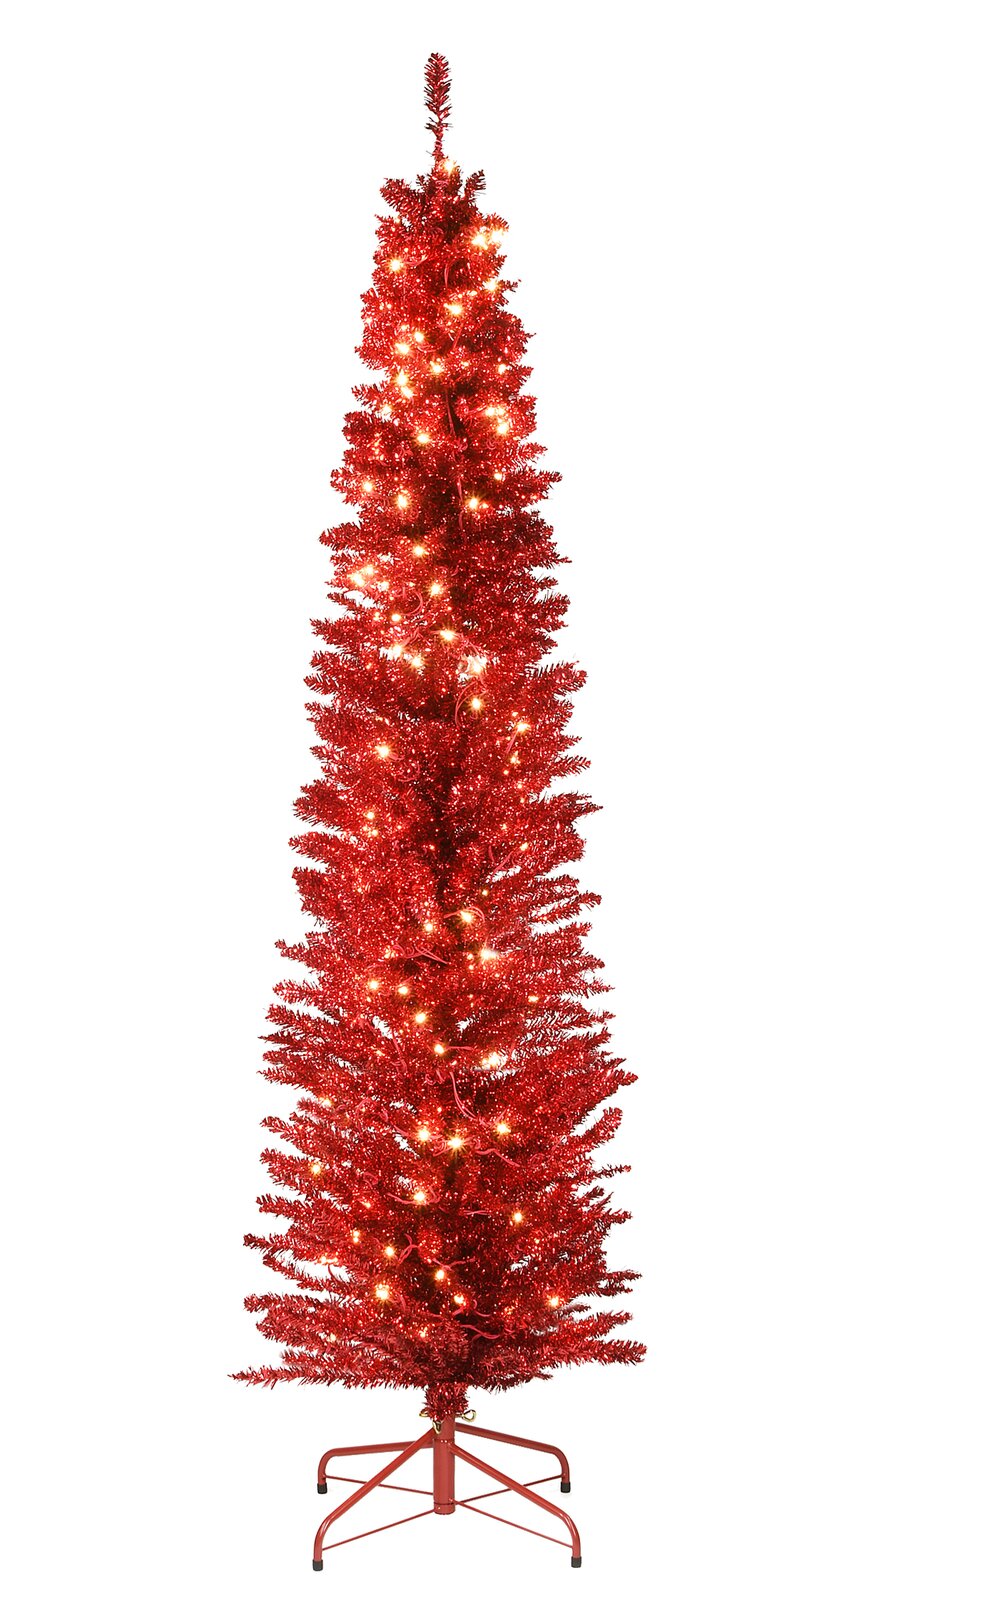 Red Pine Artificial Christmas Tree With Clear Lights